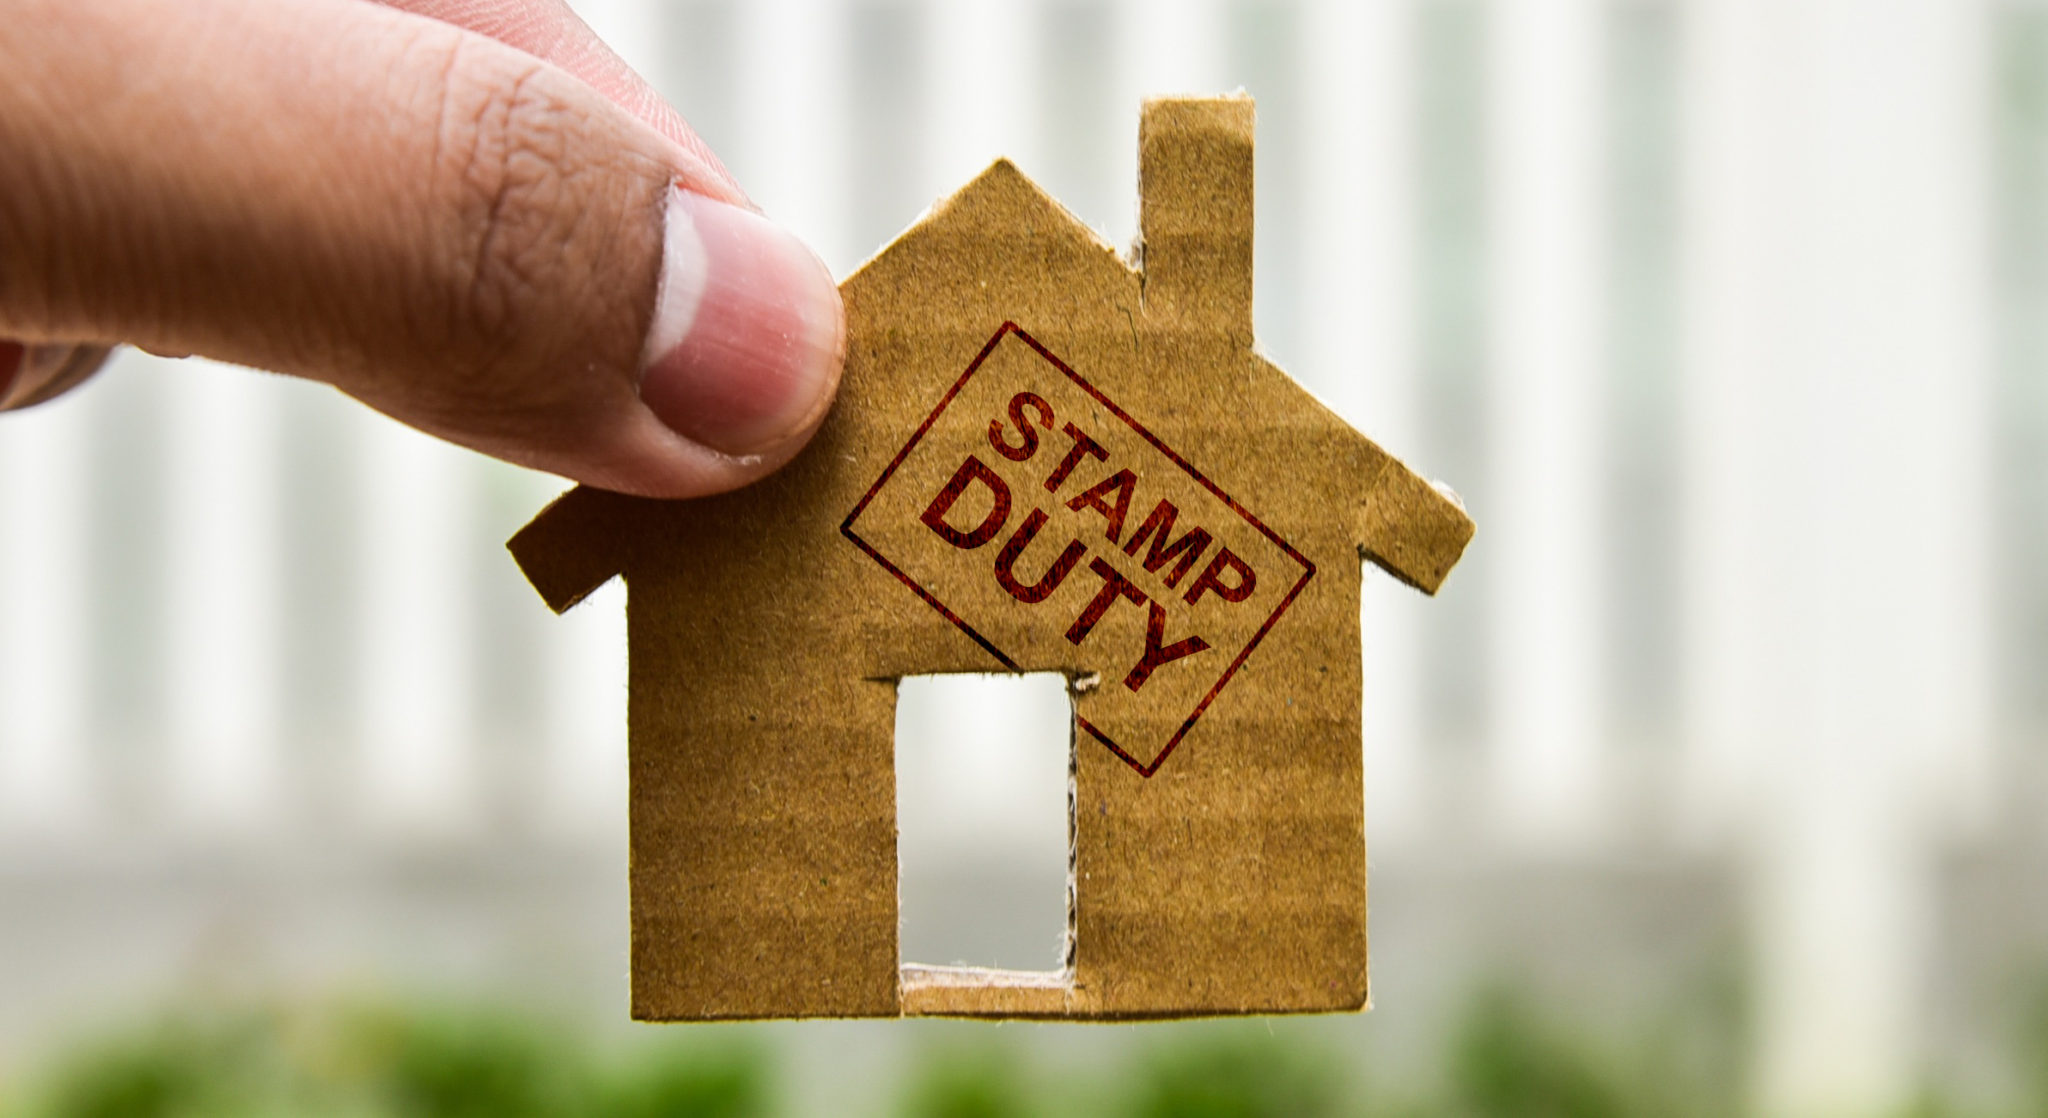 Stamp Duty Rates For Property Purchases in Australia